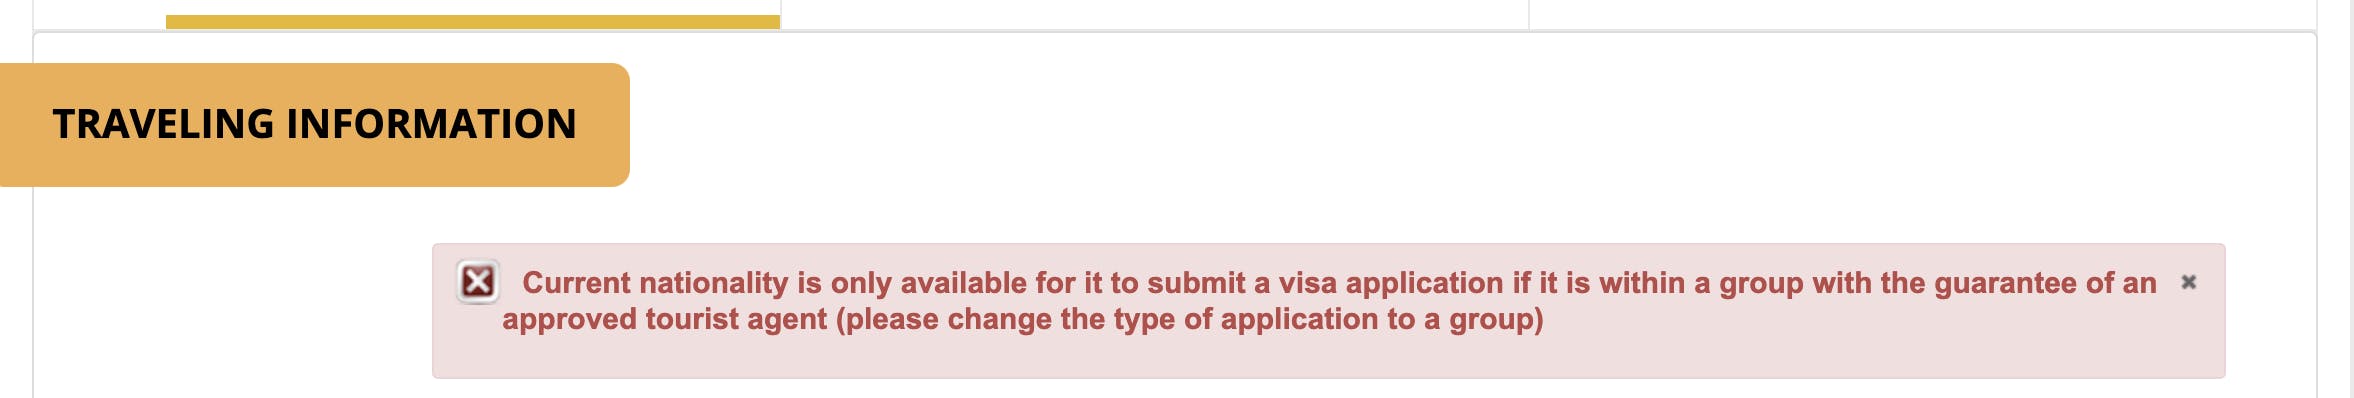 A statement on Egypt goverment portal that states: Current nationality is only available for it to submit a visa application if it is within a group with the guarantee of an * approved tourist agent (please change the type of application to a group).